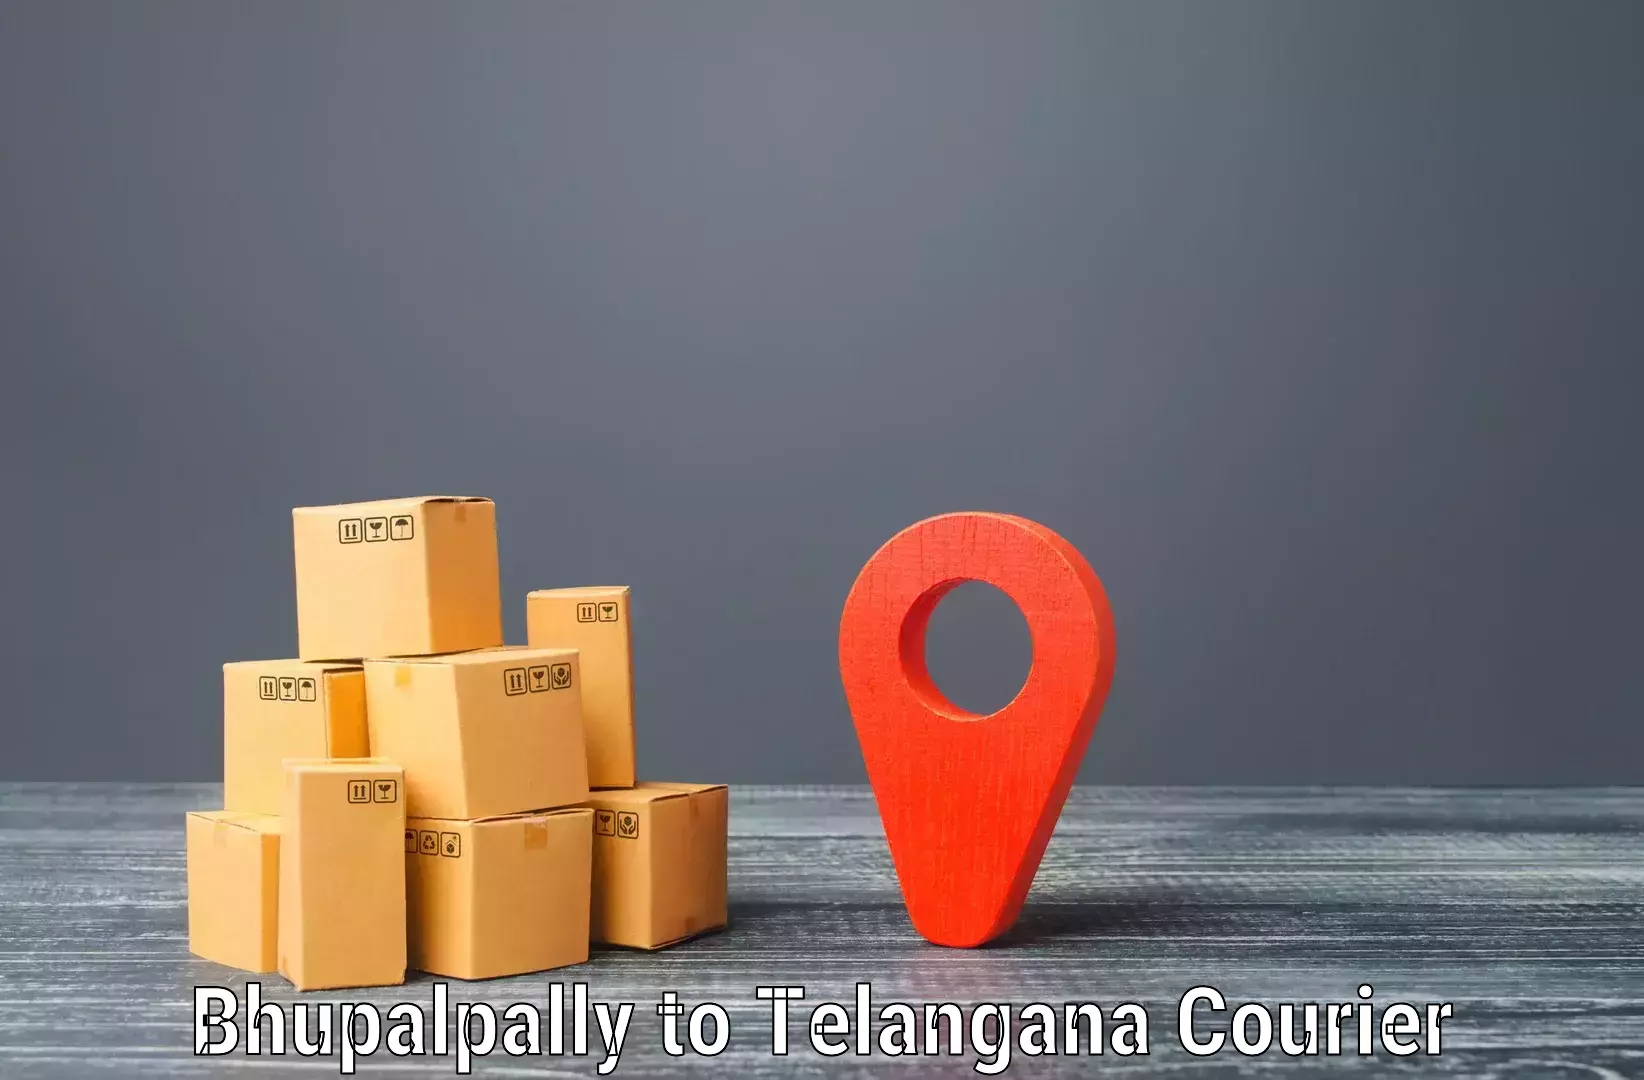 Advanced package delivery Bhupalpally to Karimnagar